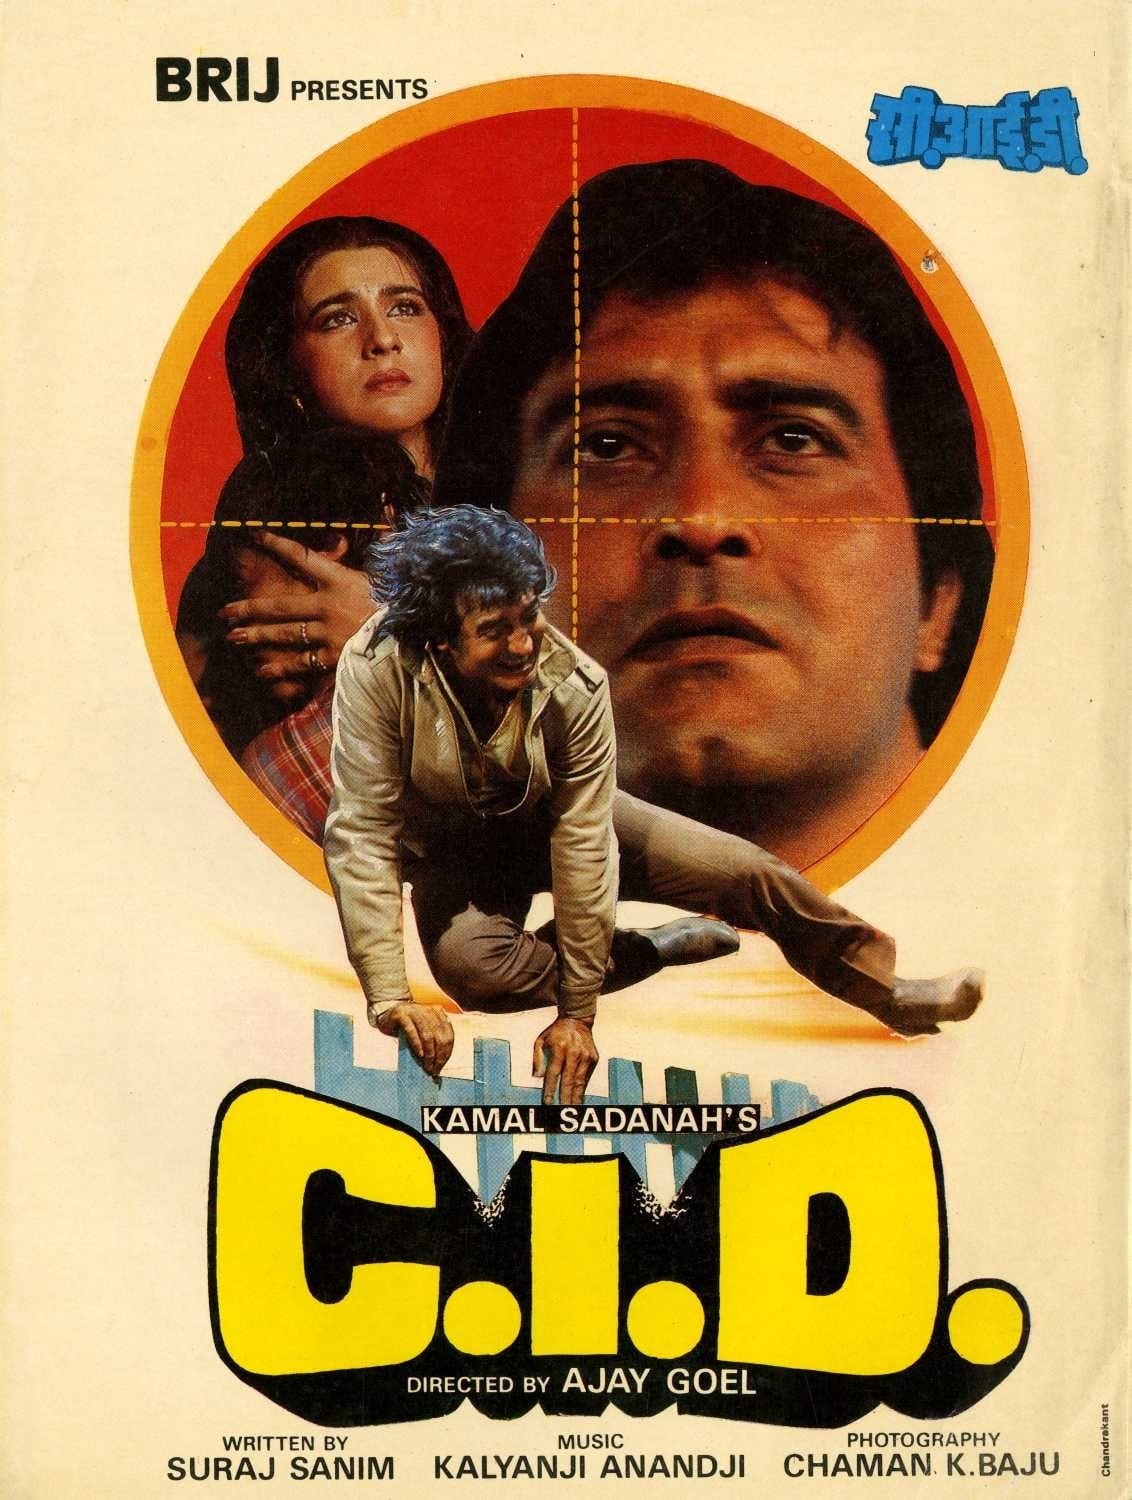 Poster for the movie "C.I.D."